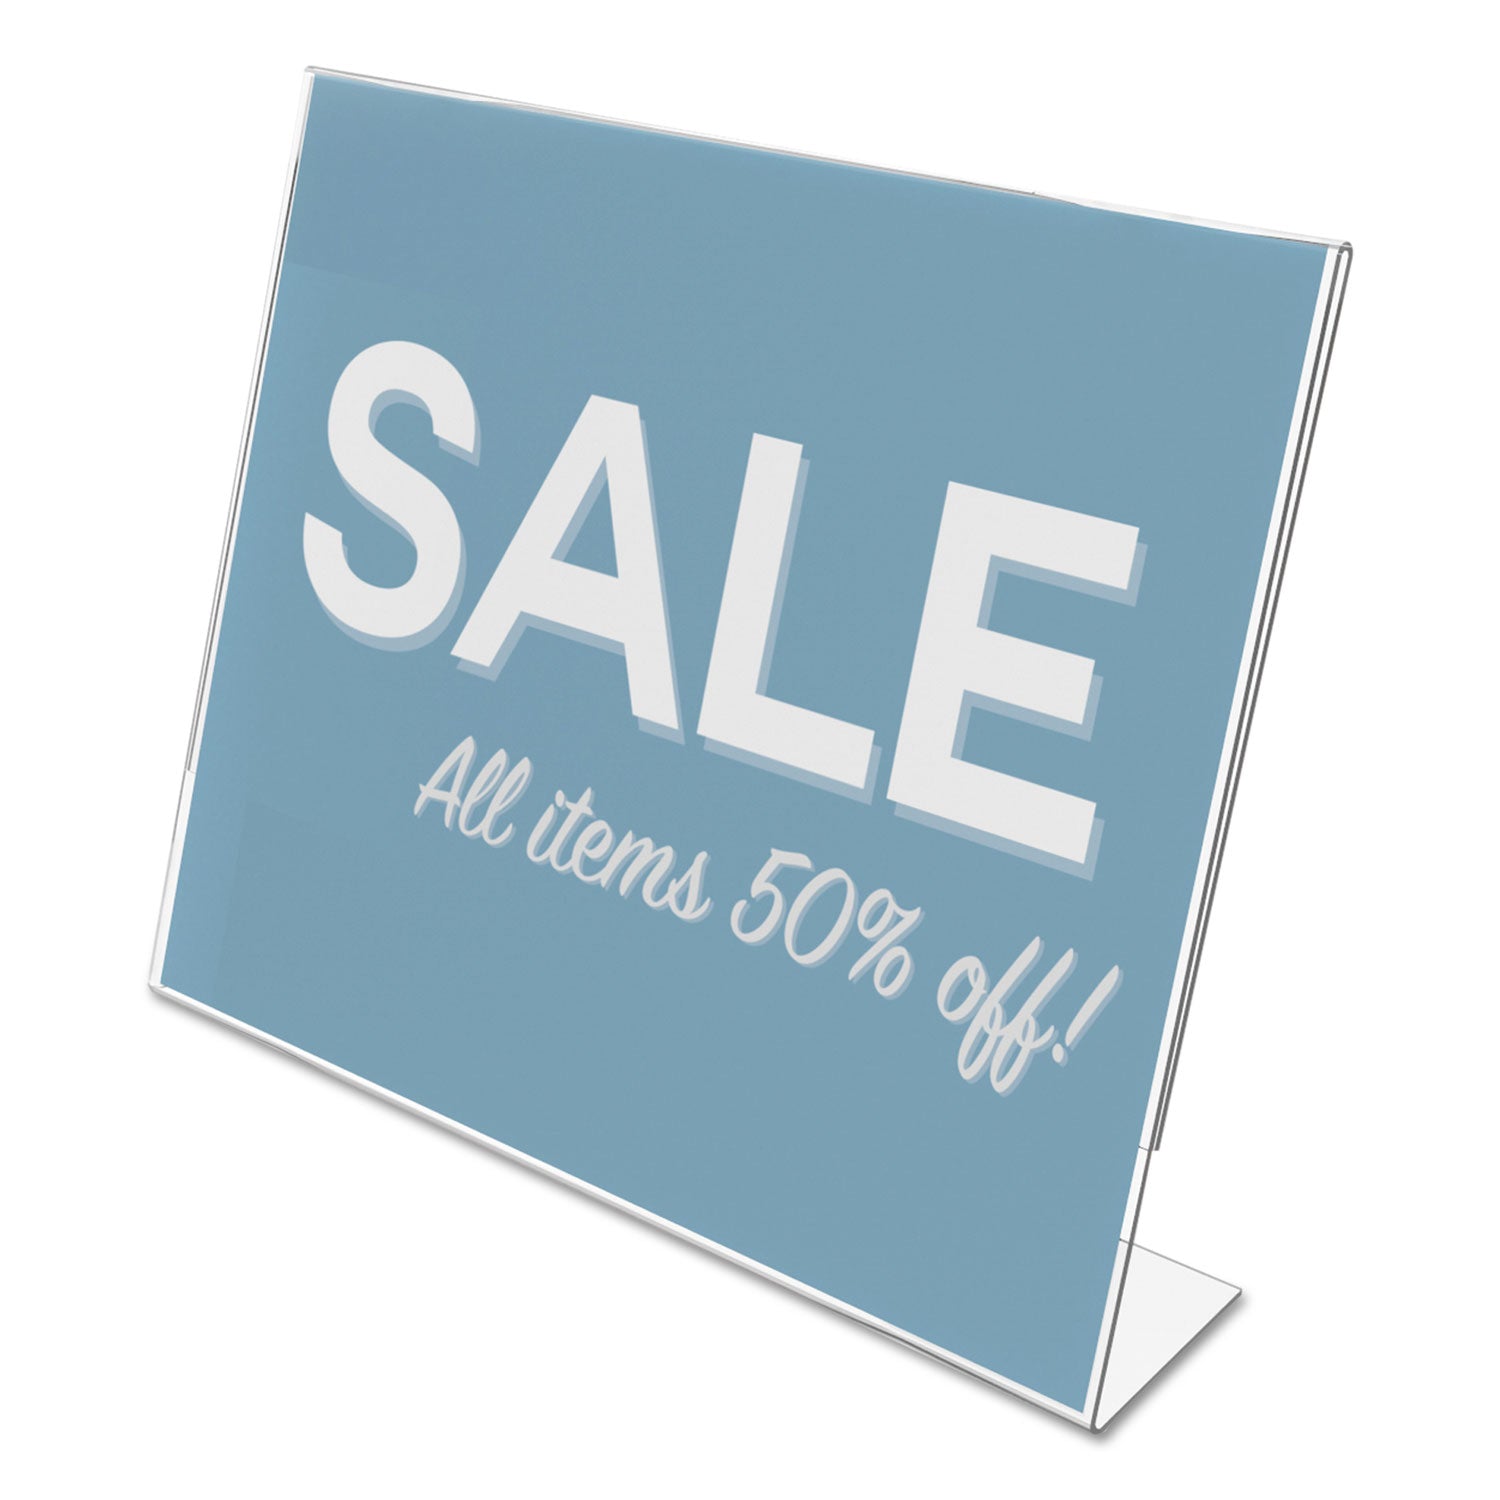 Classic Image Slanted Sign Holder, Landscaped, 11 x 8.5 Insert, Clear - 